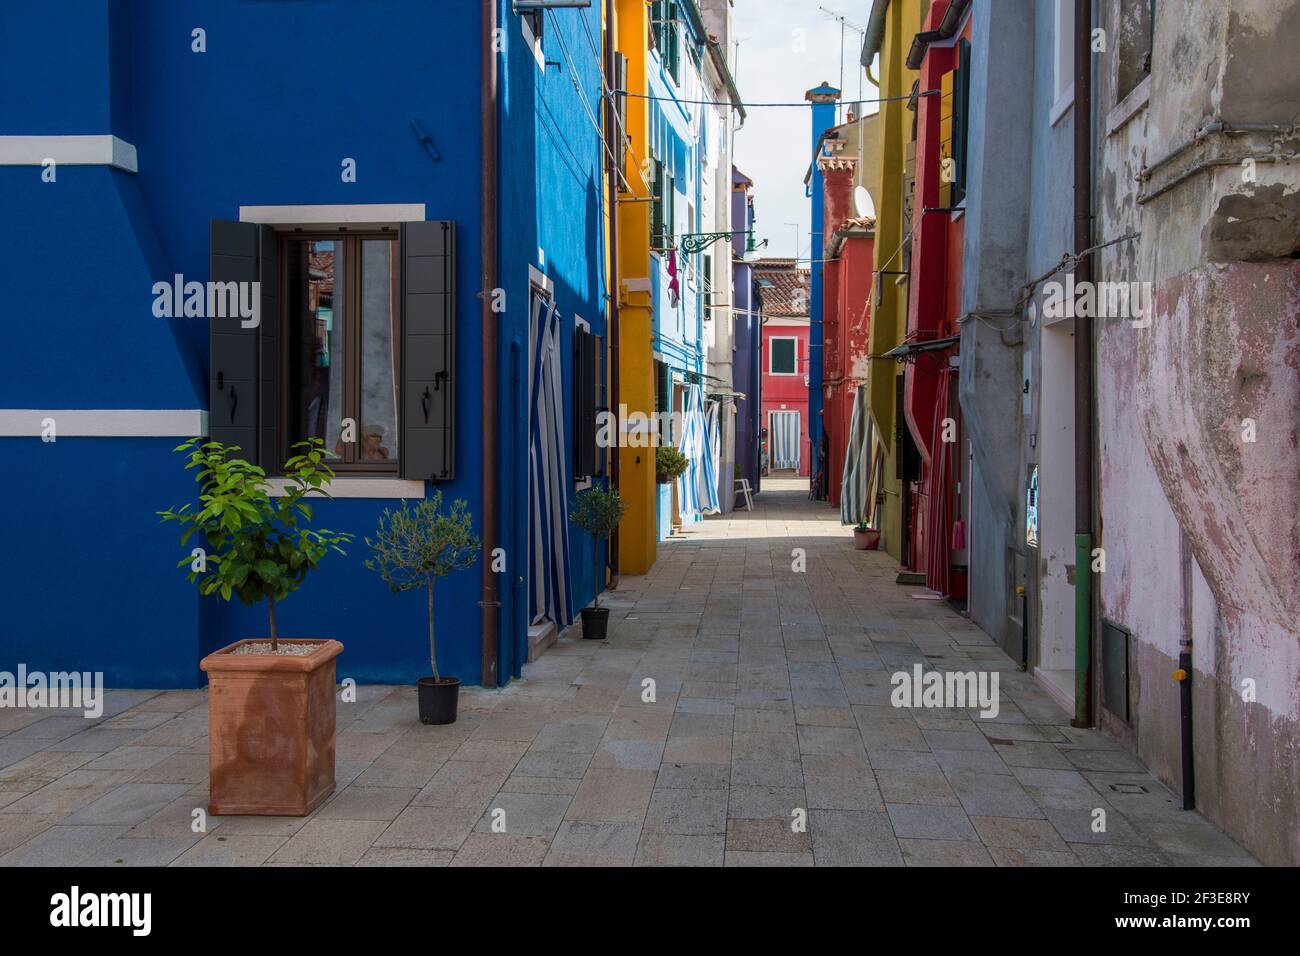 Burano island, characteristic view of colorful houses, Venice lagoon, Italy, Europe Stock Photo